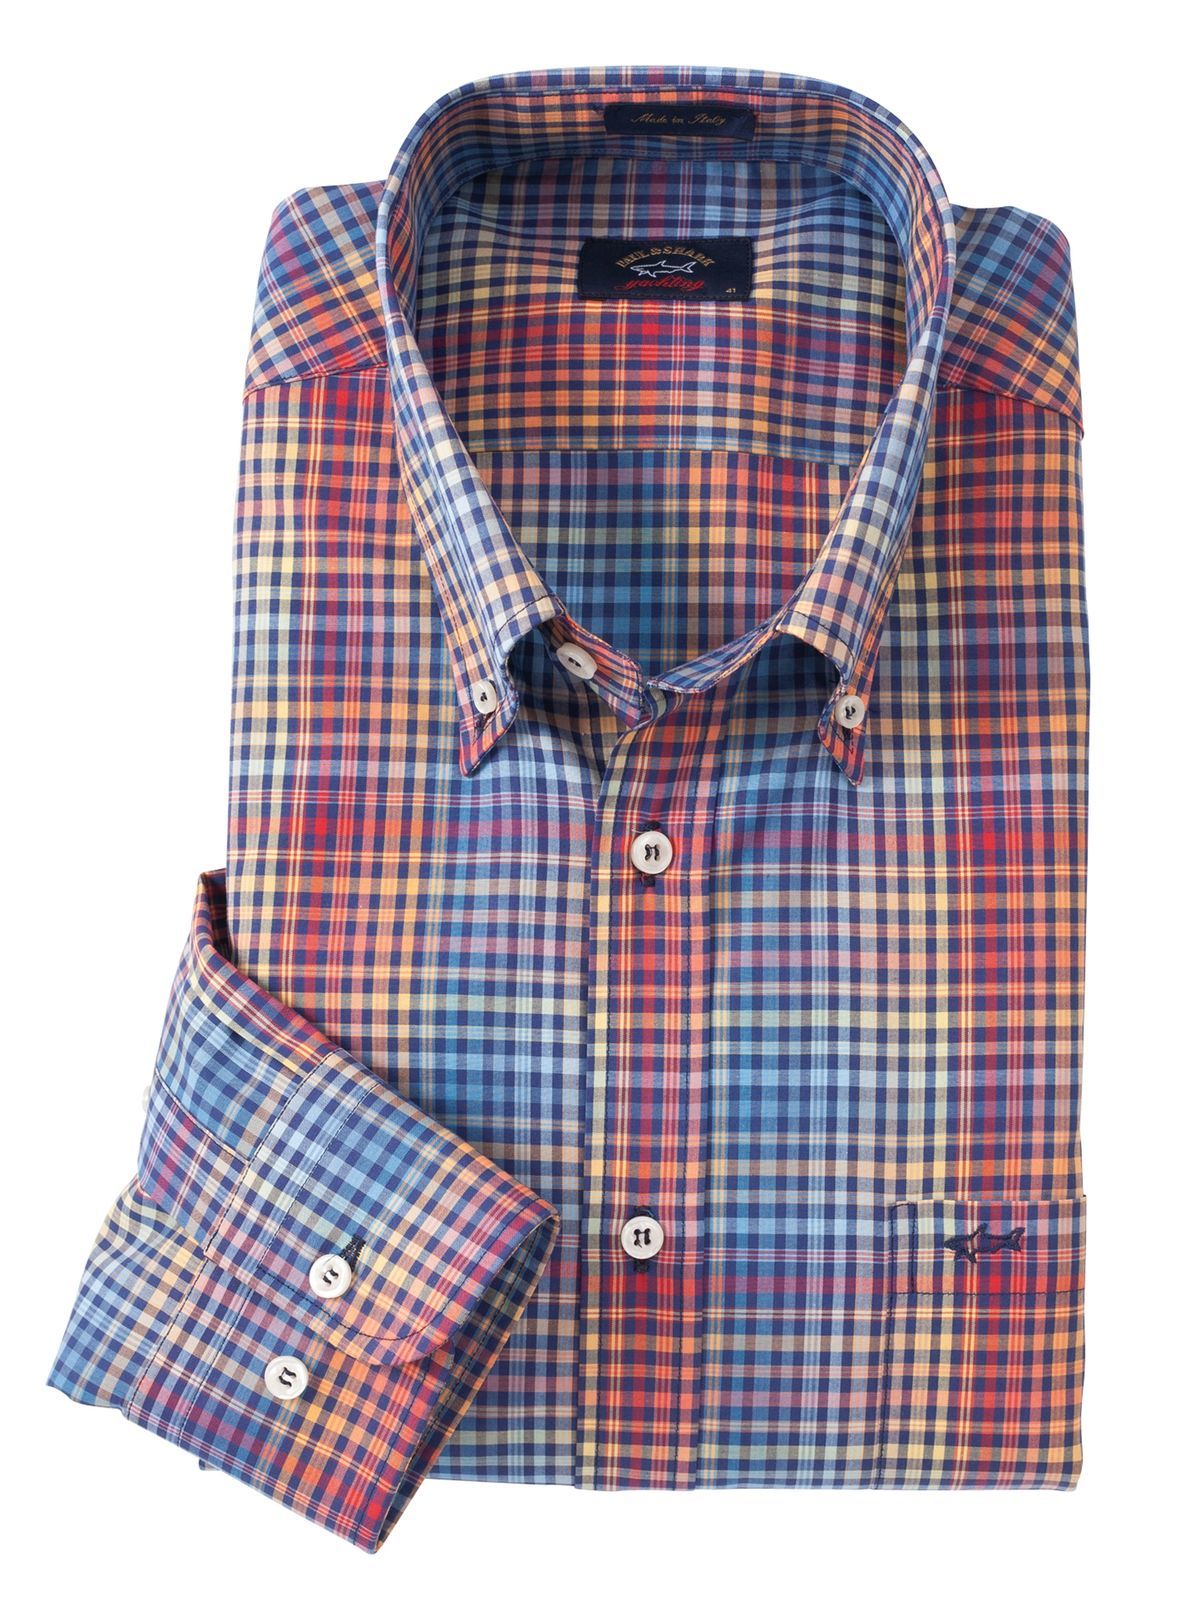 Multicolor Ombre Check Sport Shirt by Paul & Shark